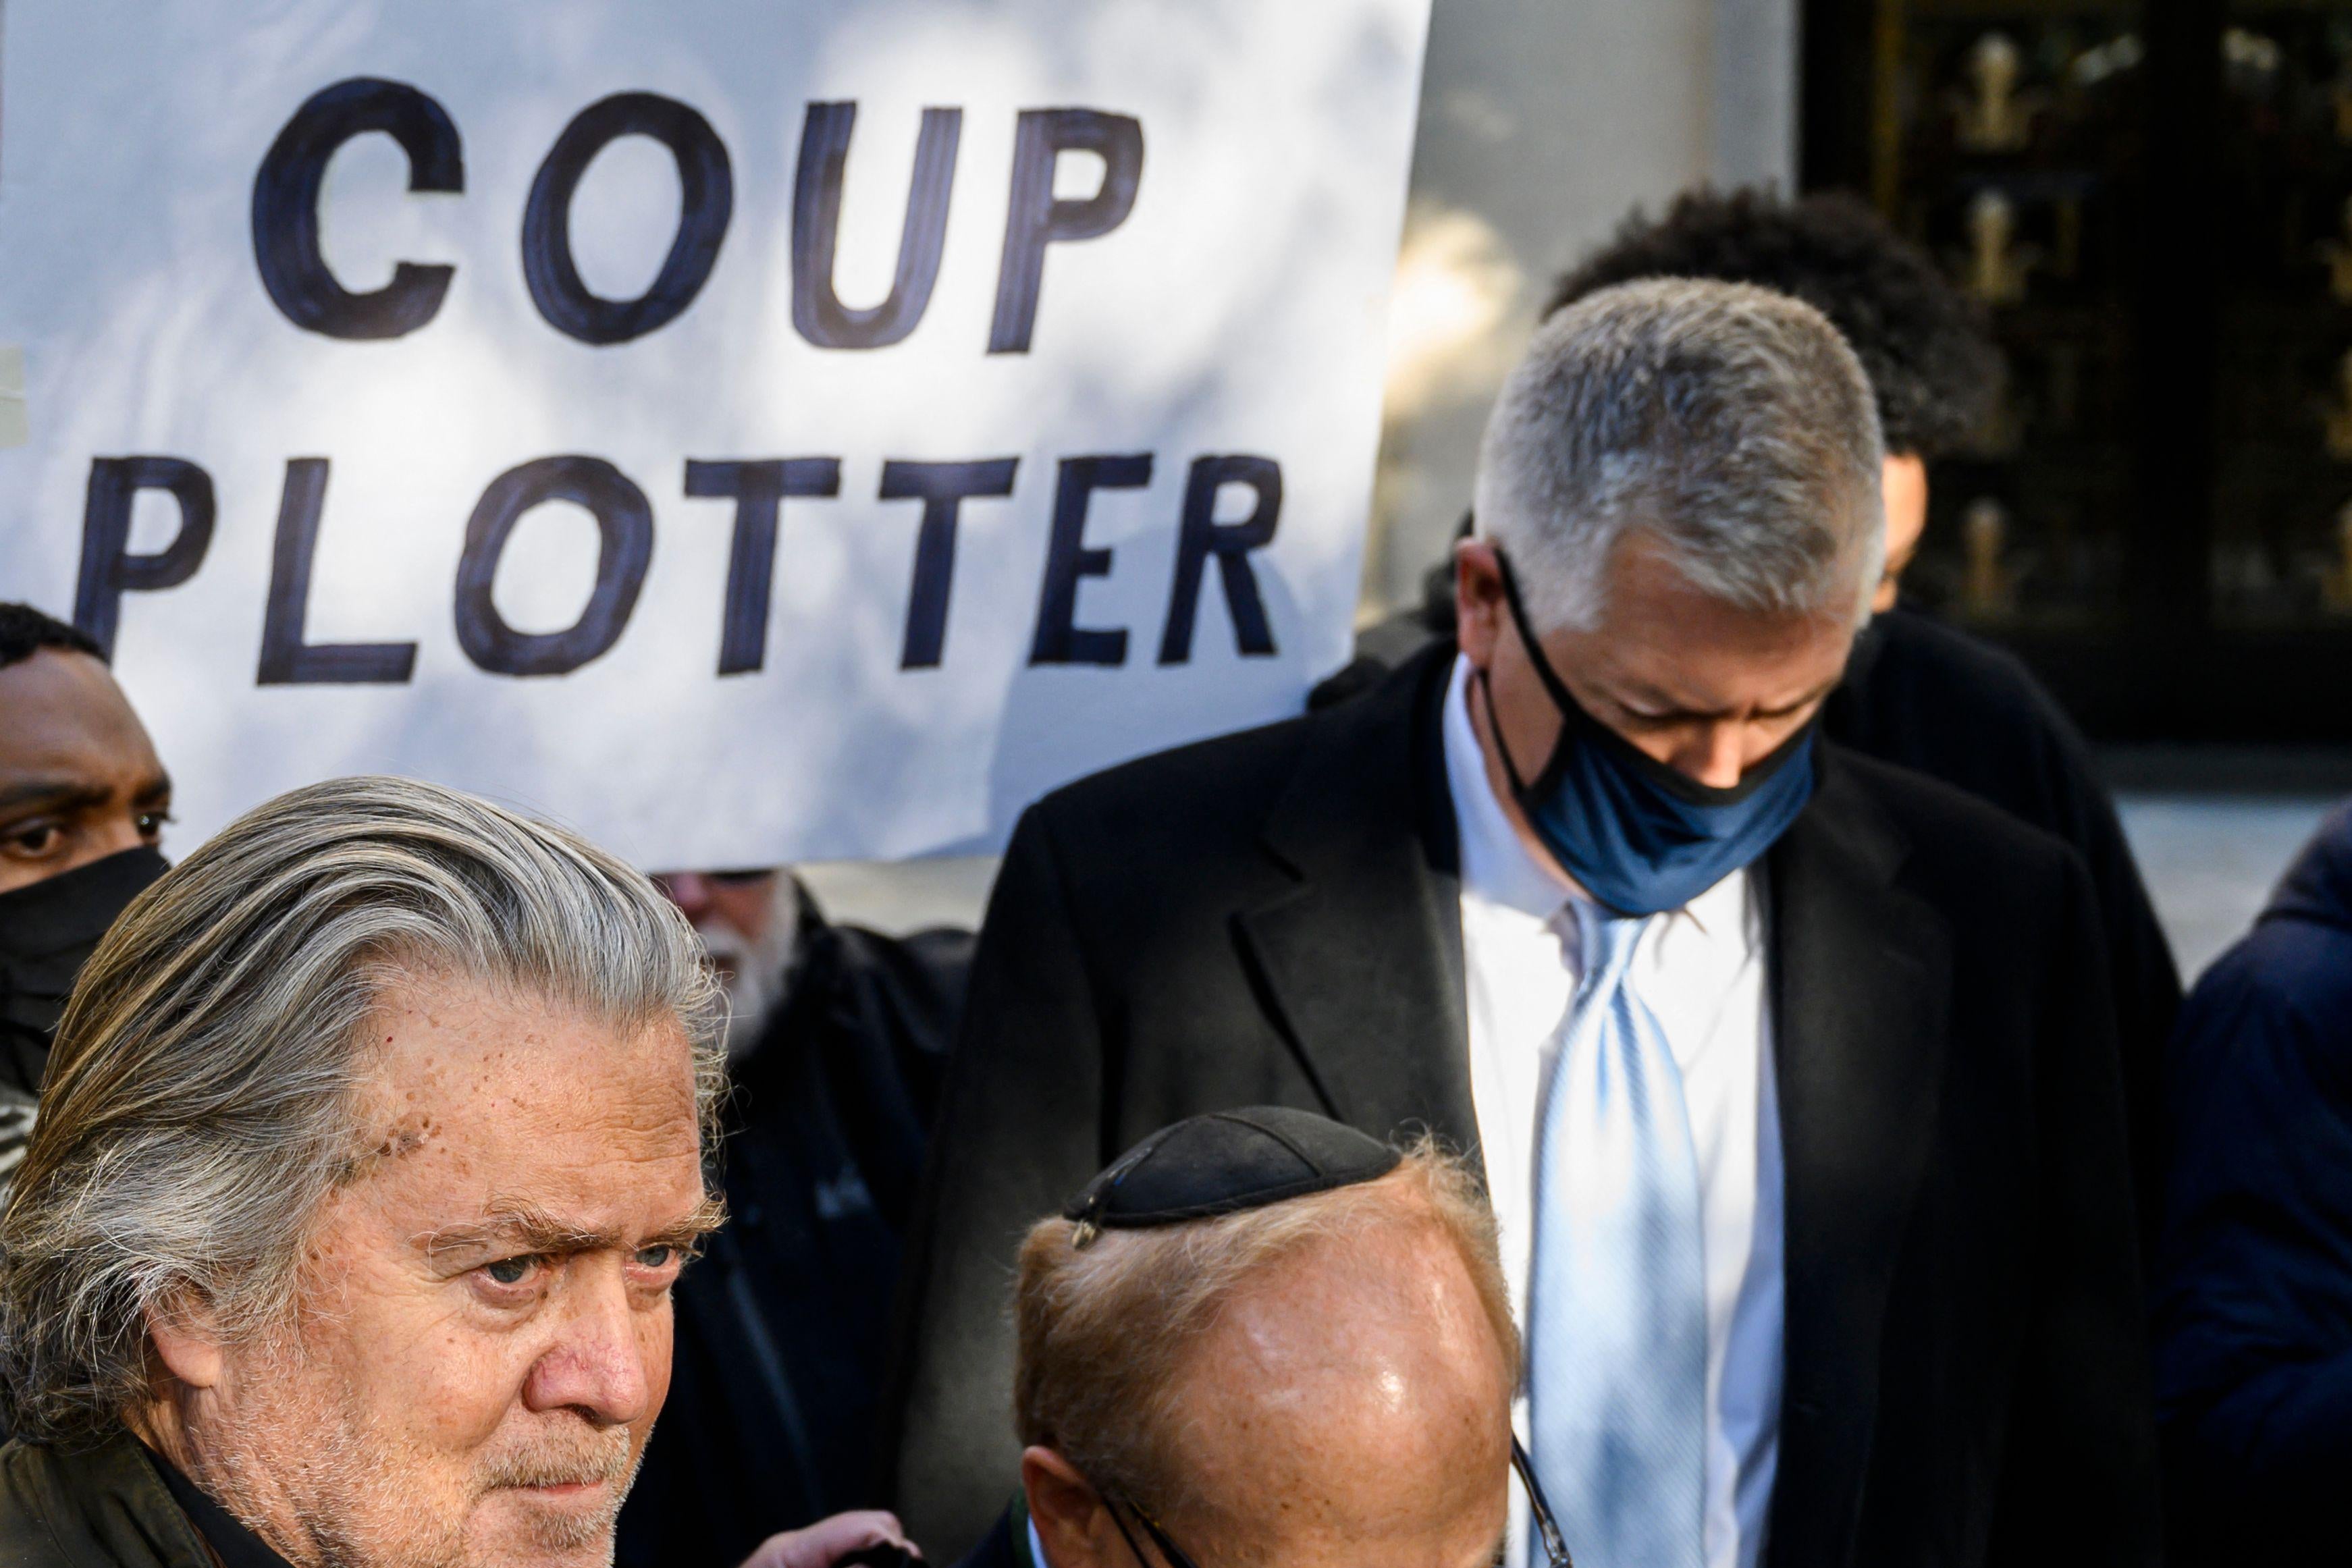 Bannon stands outside among other people while behind him someone holds up a sign that says "COUP PLOTTER"